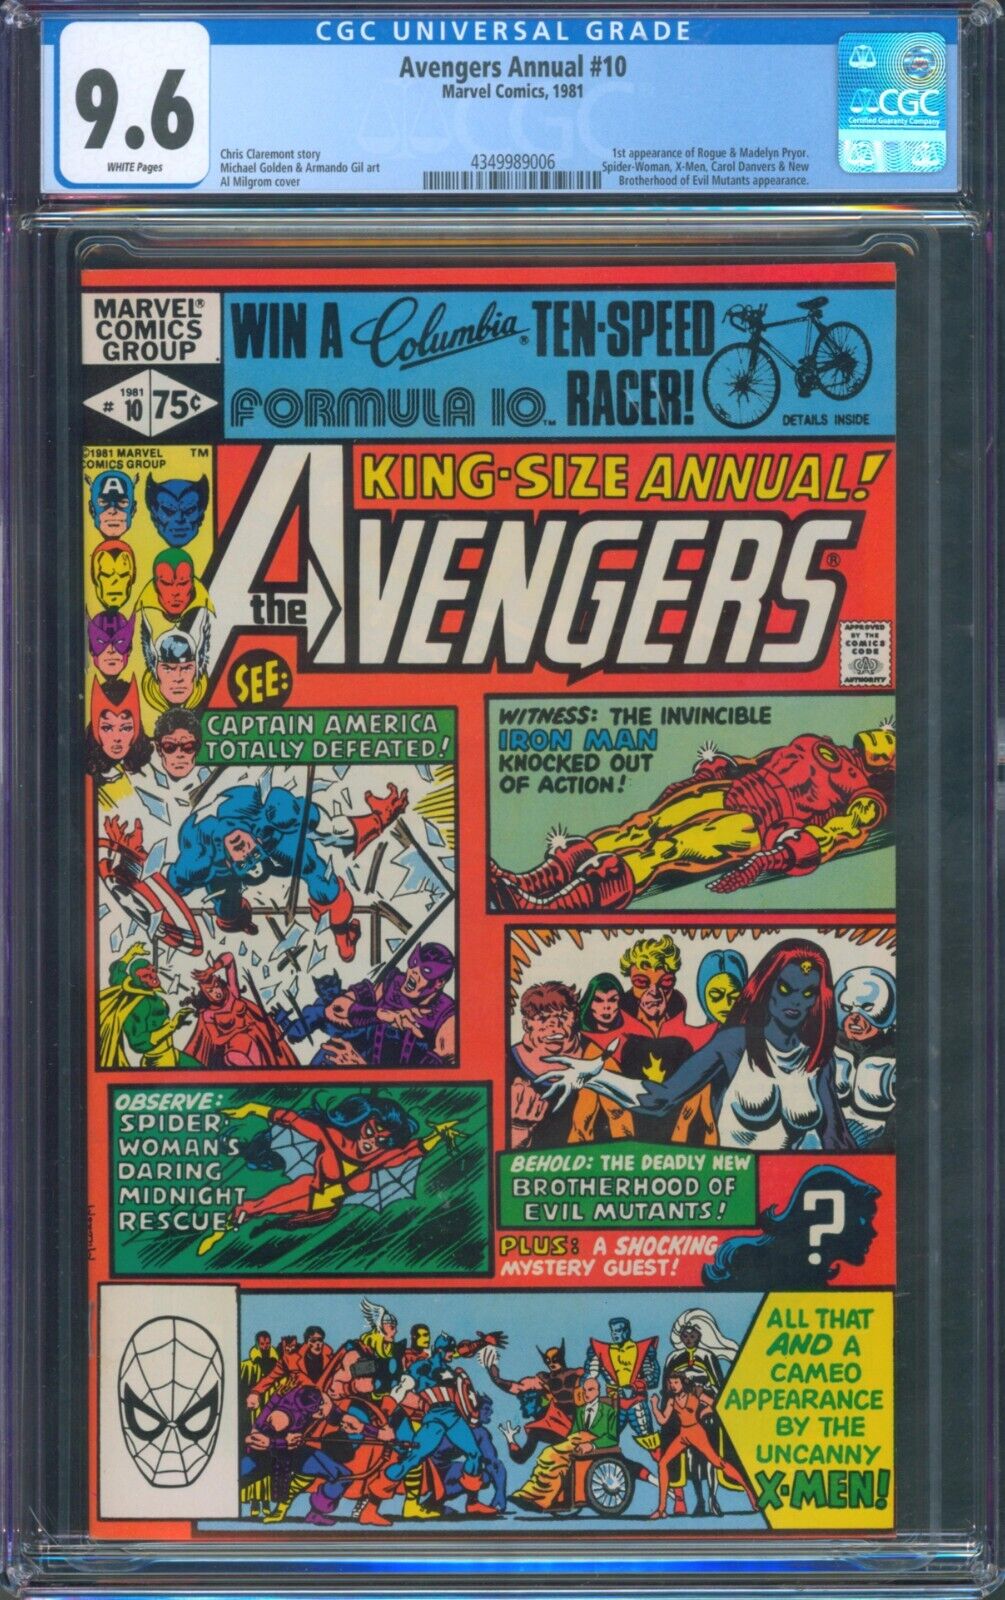 Avengers Annual #10 ⭐ CGC 9.6 WHITE PGs ⭐ 1st App of ROGUE + MADELYN PRYOR 1981